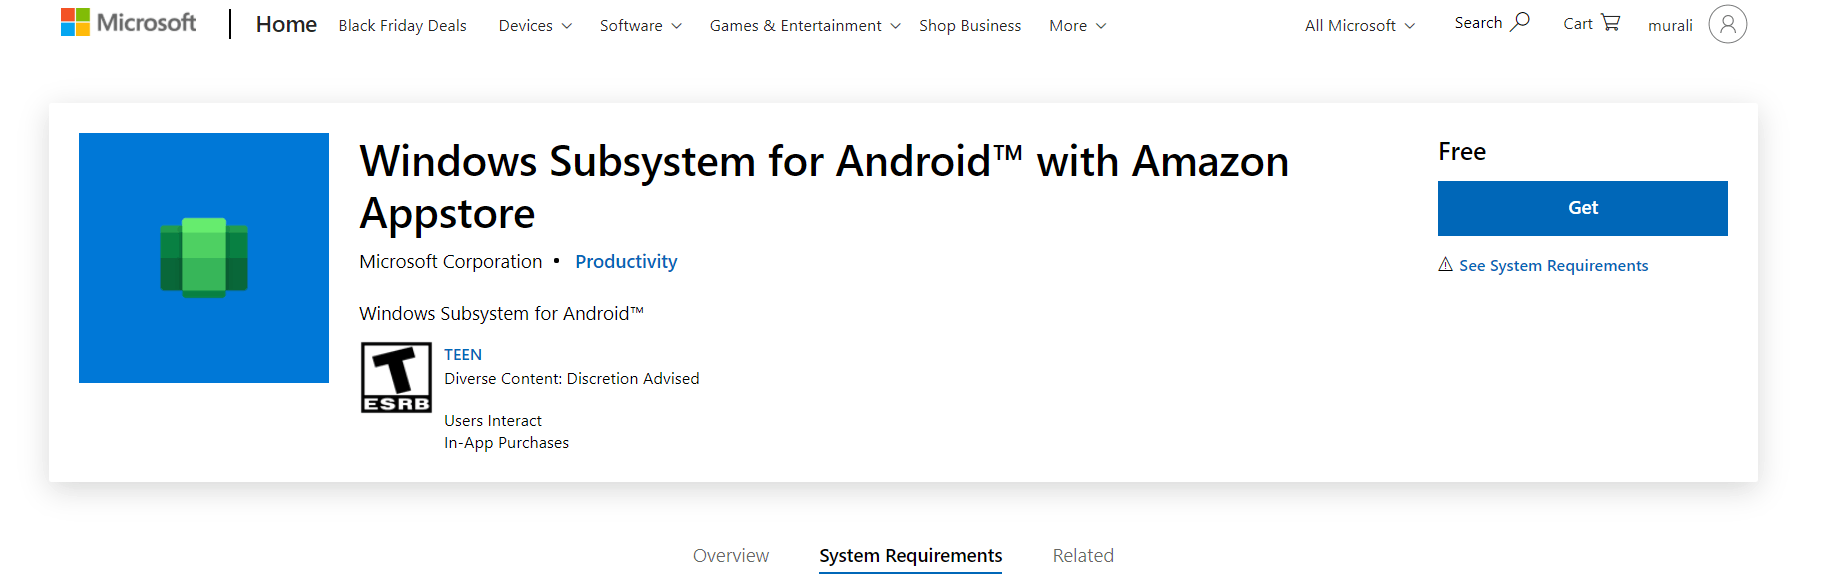 When Windows Subsystem for Android will be available in India? Any tentative dates? a9c669dc-213c-49c0-ba35-50de4017ab90?upload=true.png